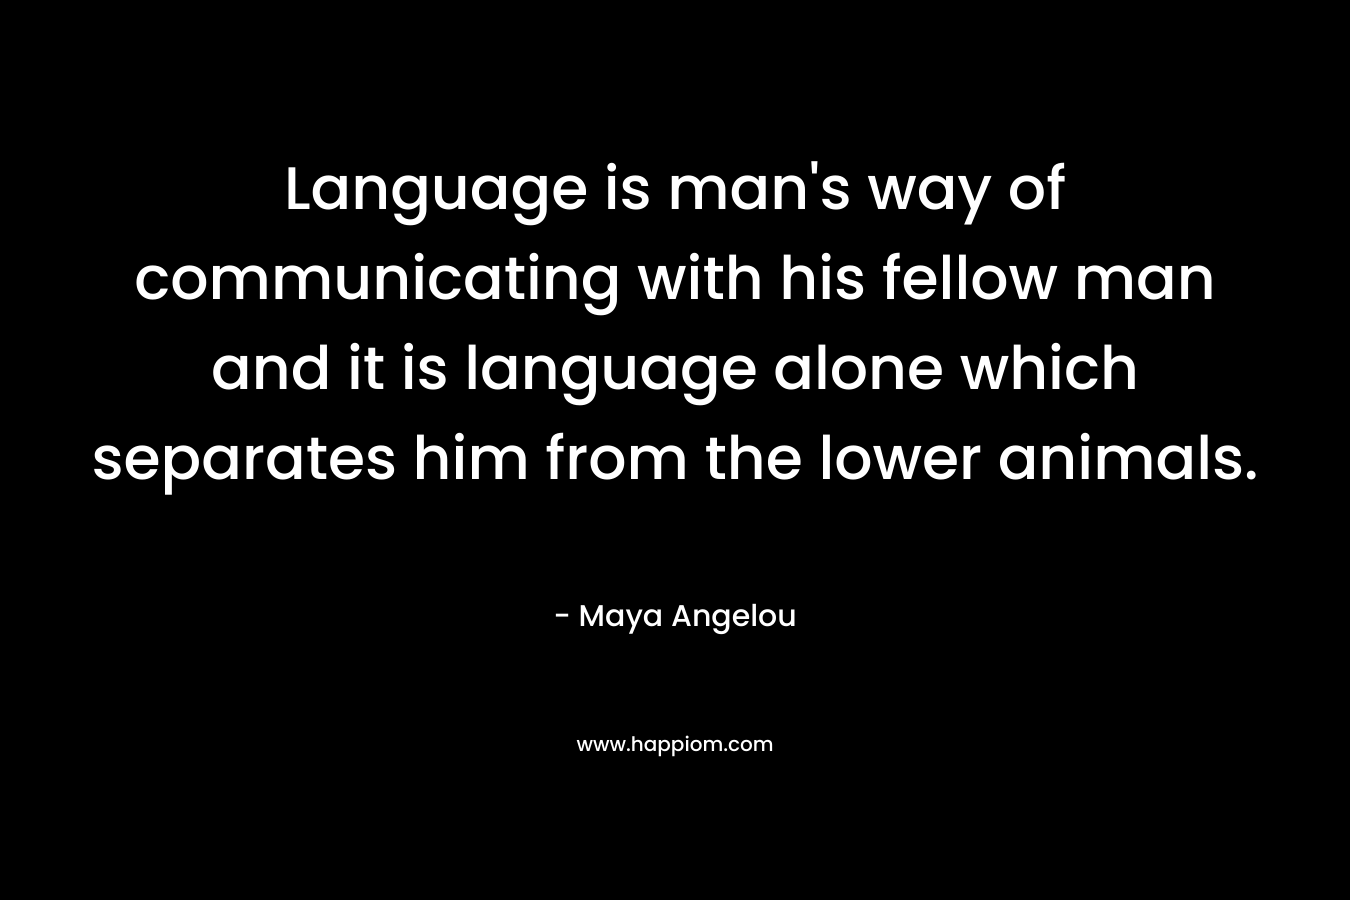 Language is man's way of communicating with his fellow man and it is language alone which separates him from the lower animals.